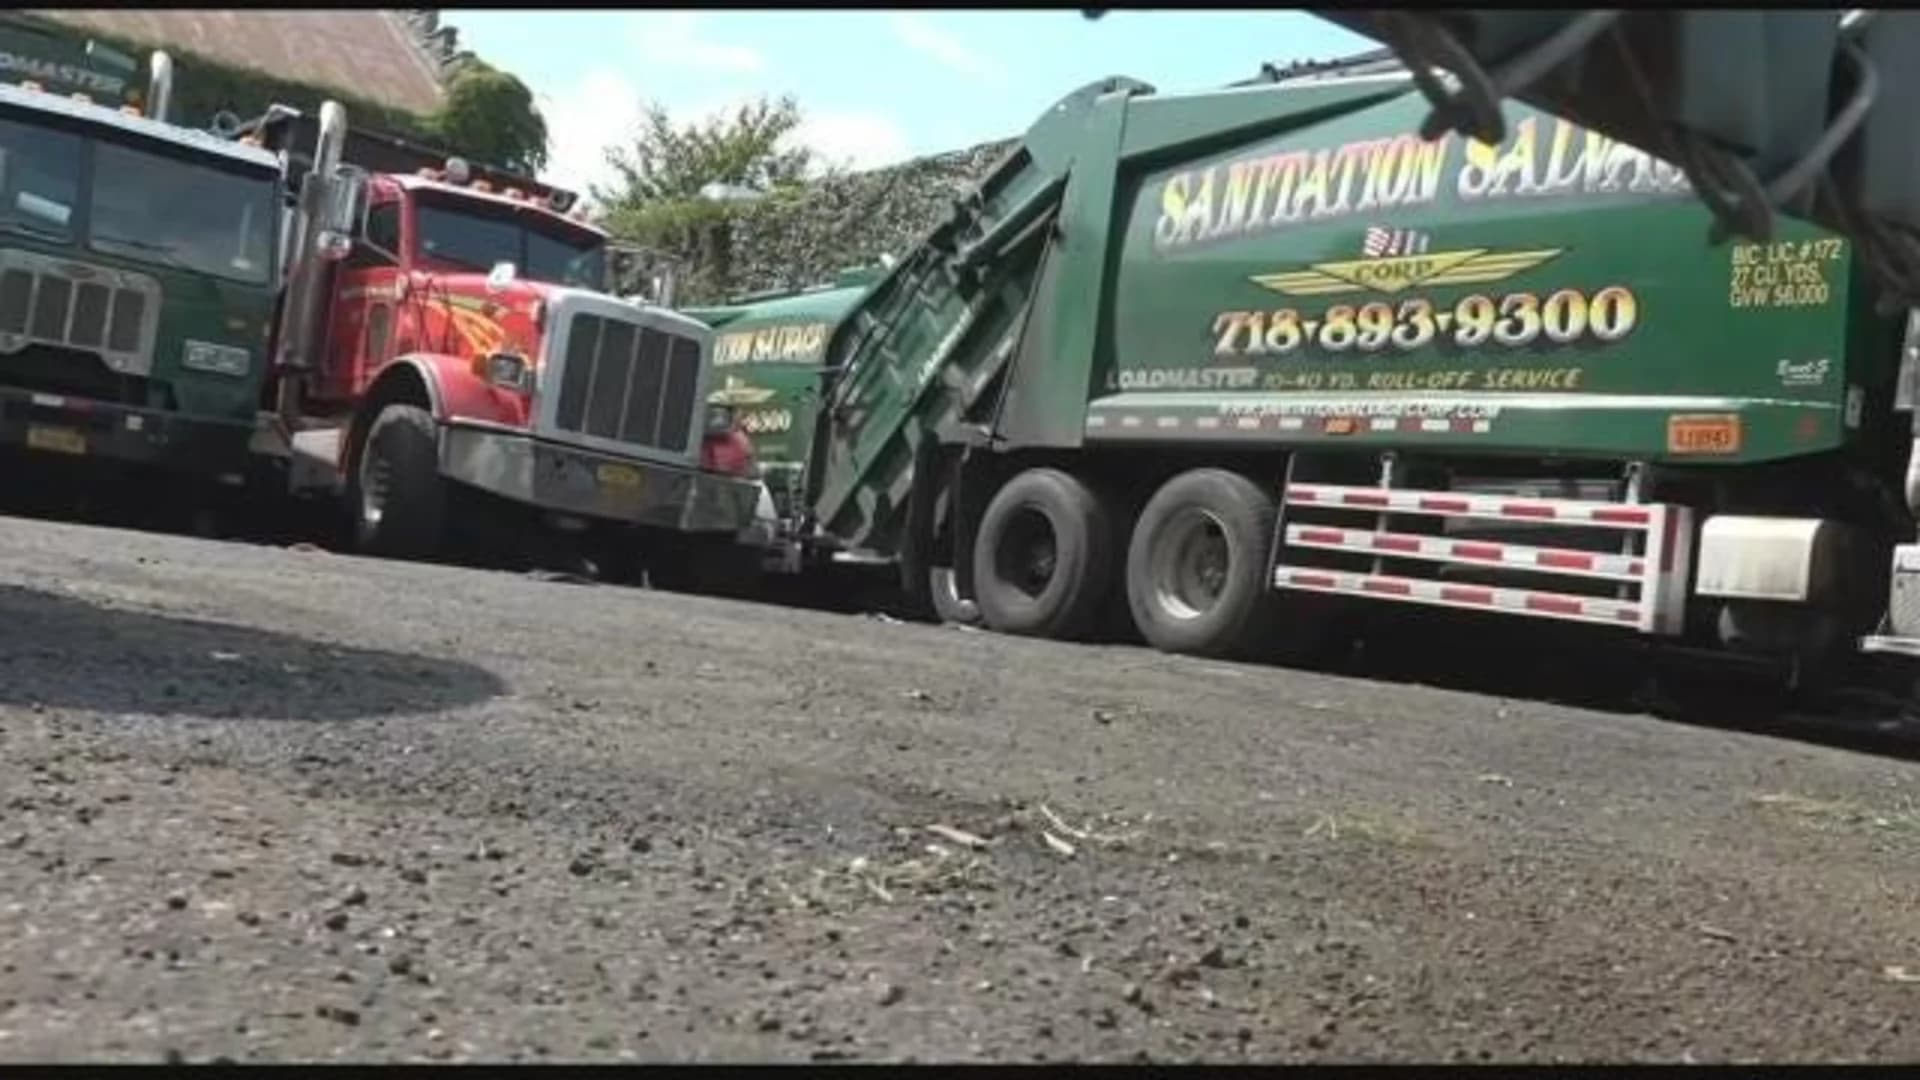 Trash company wants to continue service after license suspension